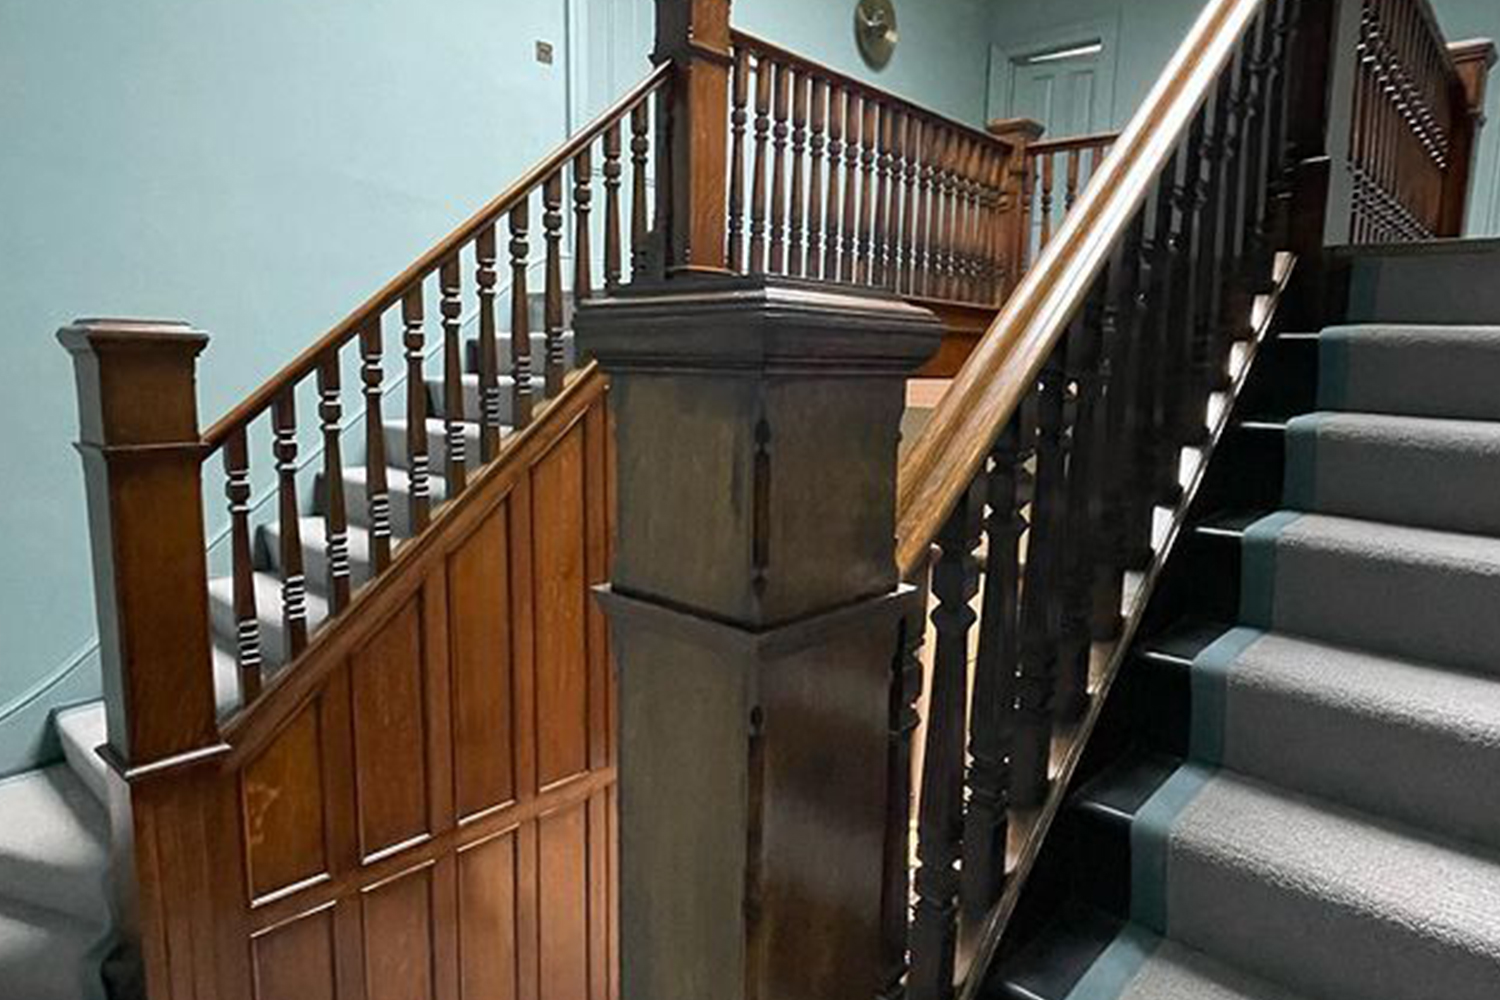 Staircase with wooden handrail after polishing